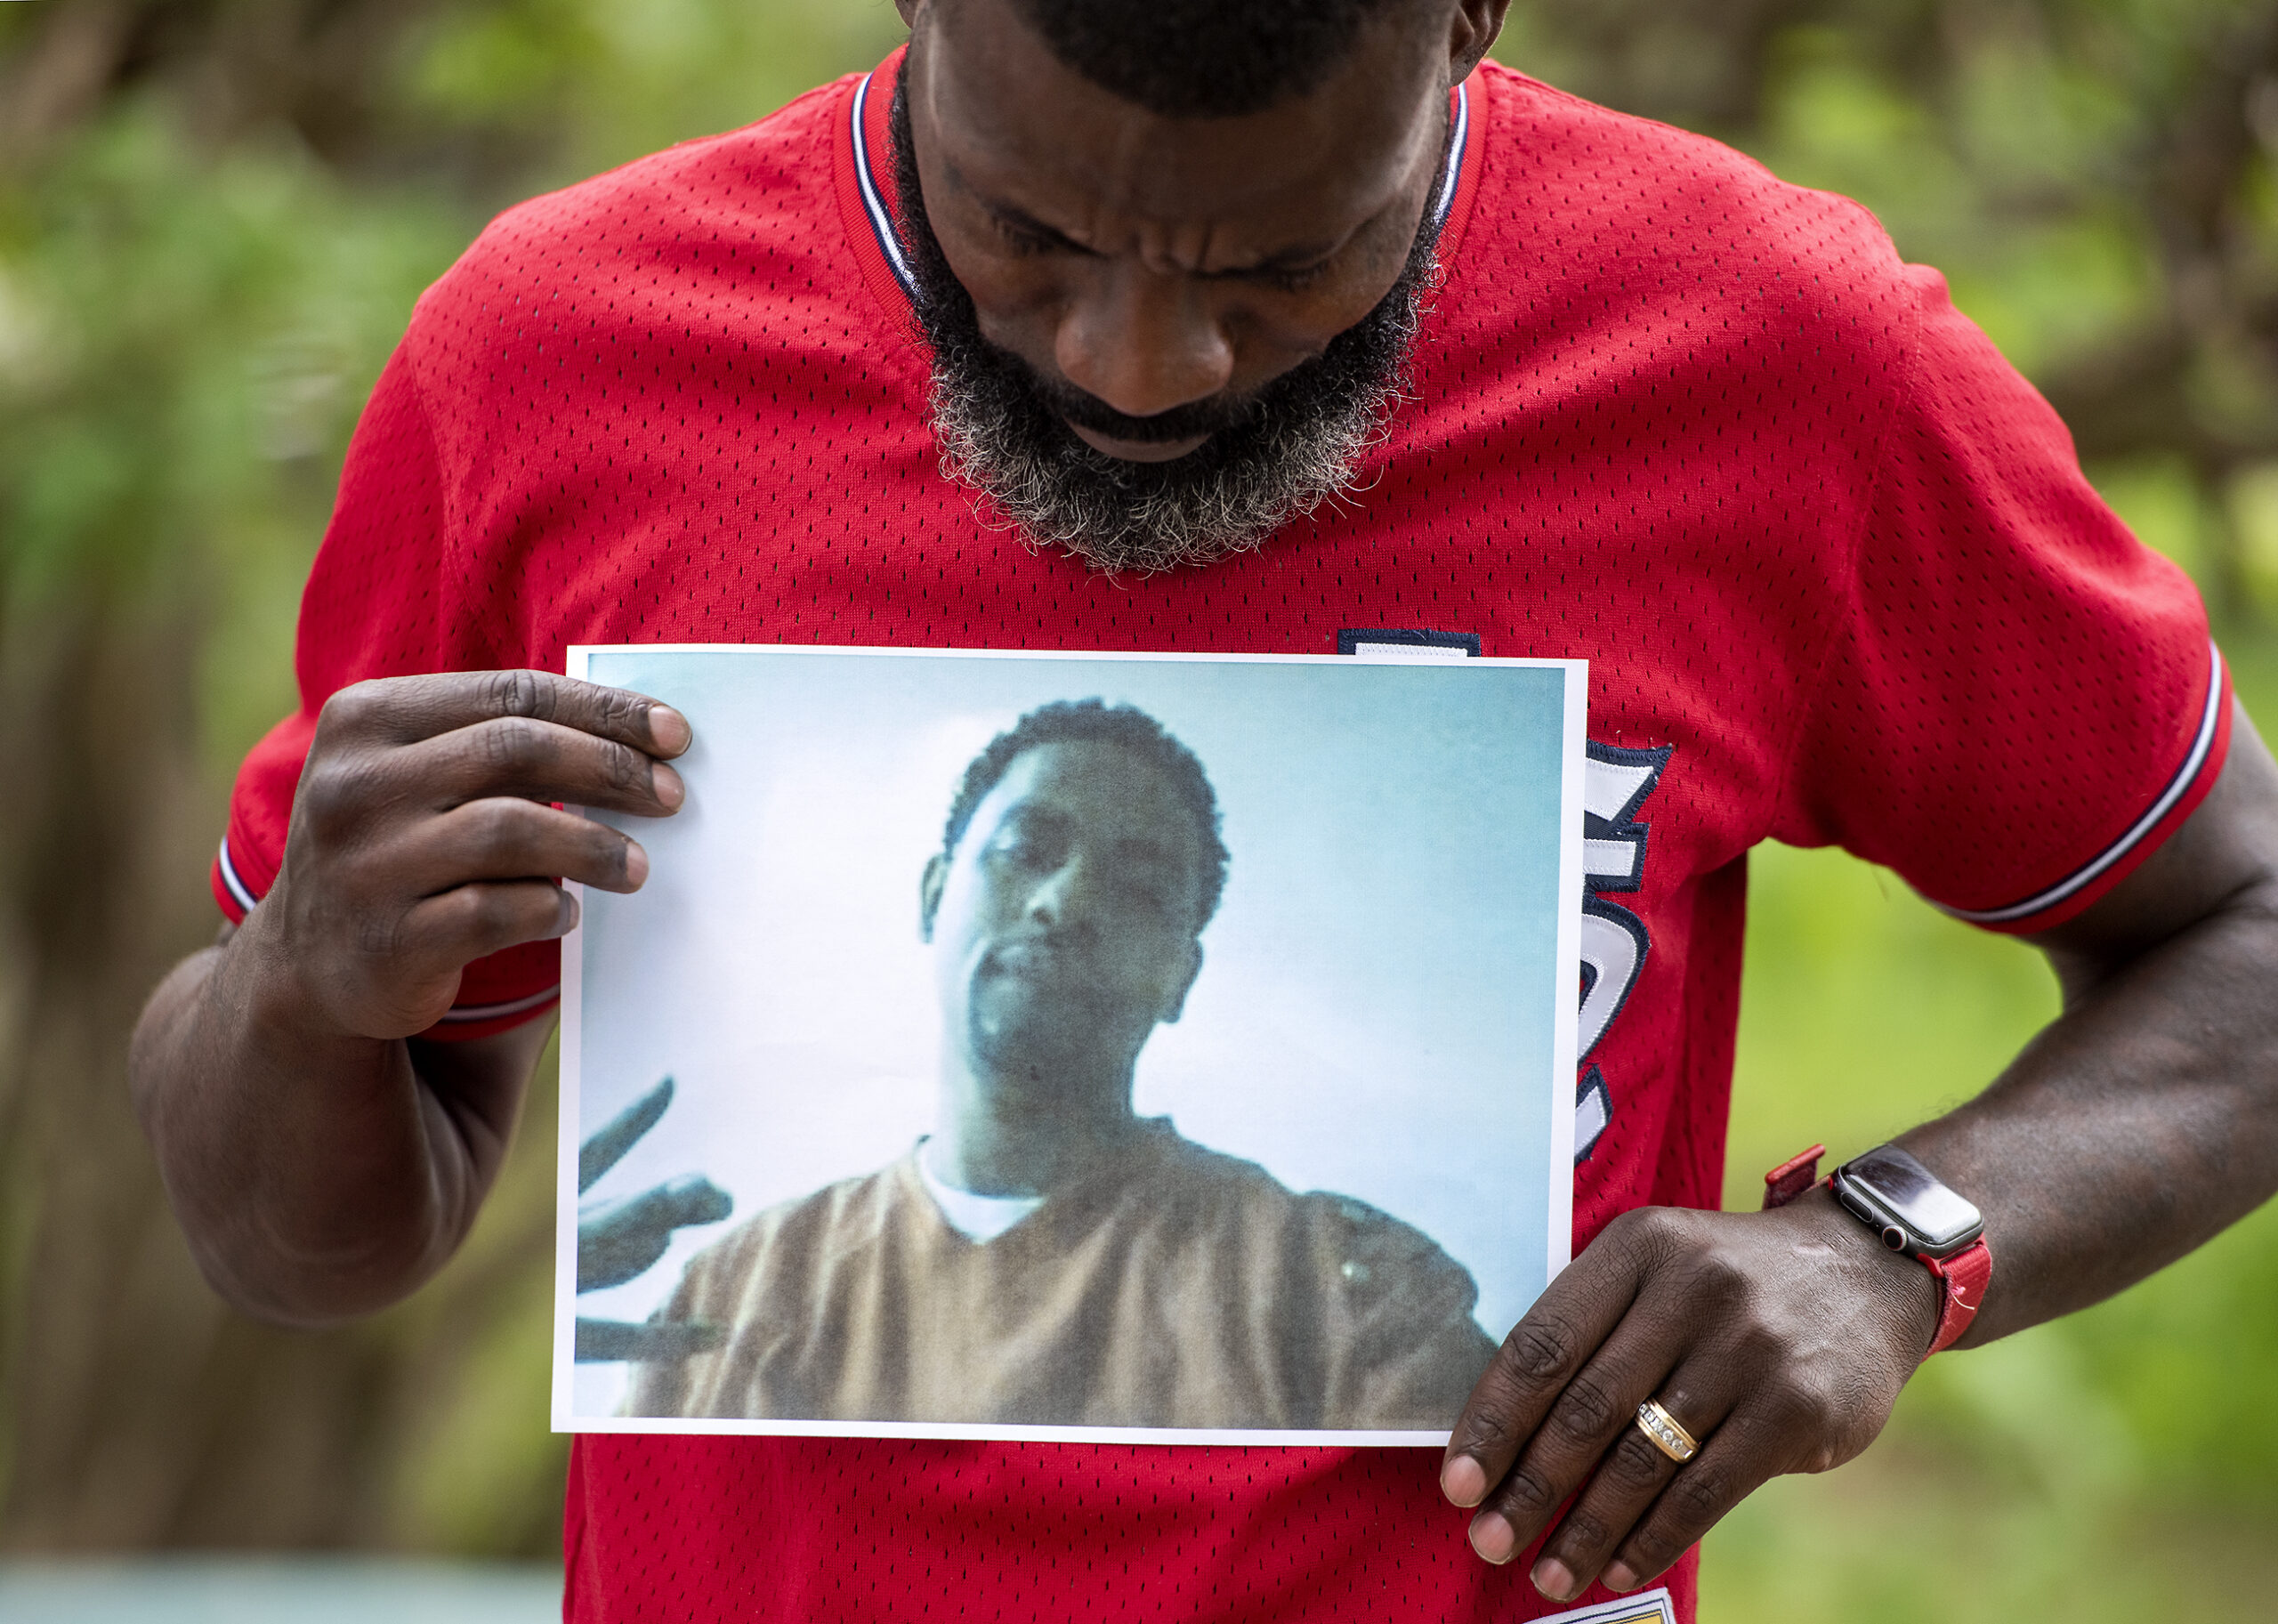 Segdrick Farley looks down at a printed photo of his brother, Alvin L. Simmons